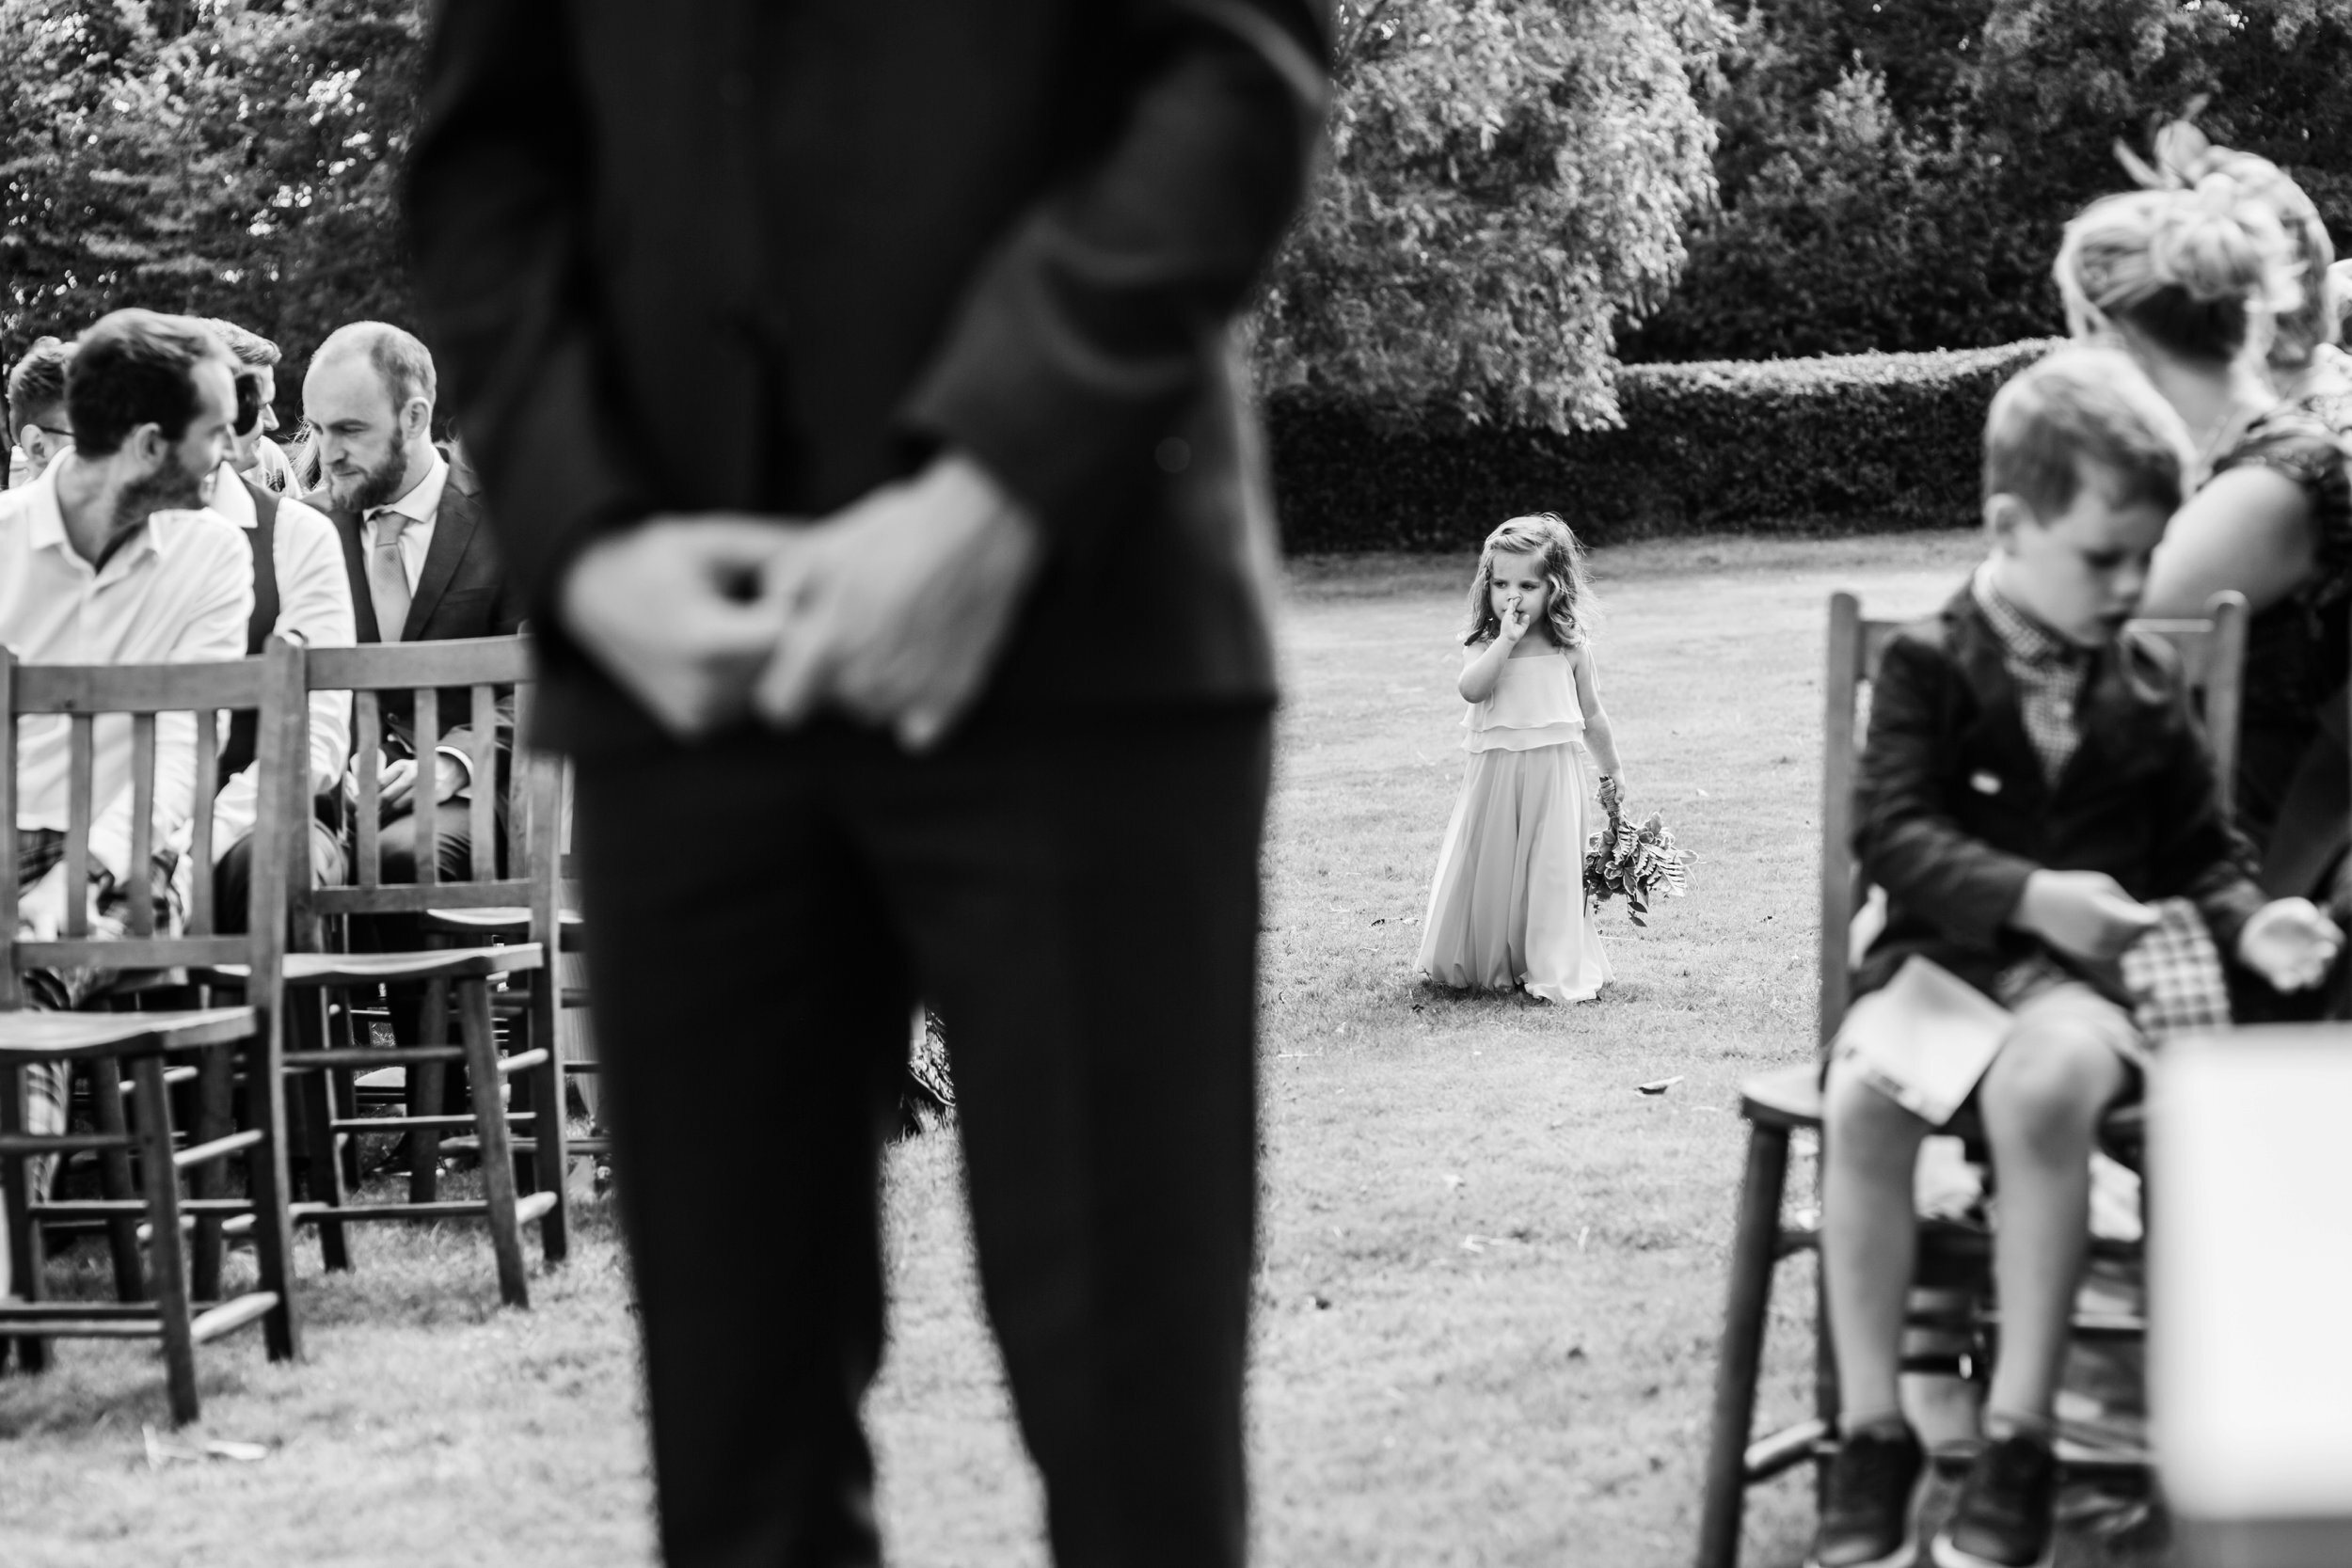 A groom watches a flower girl working down an aisle